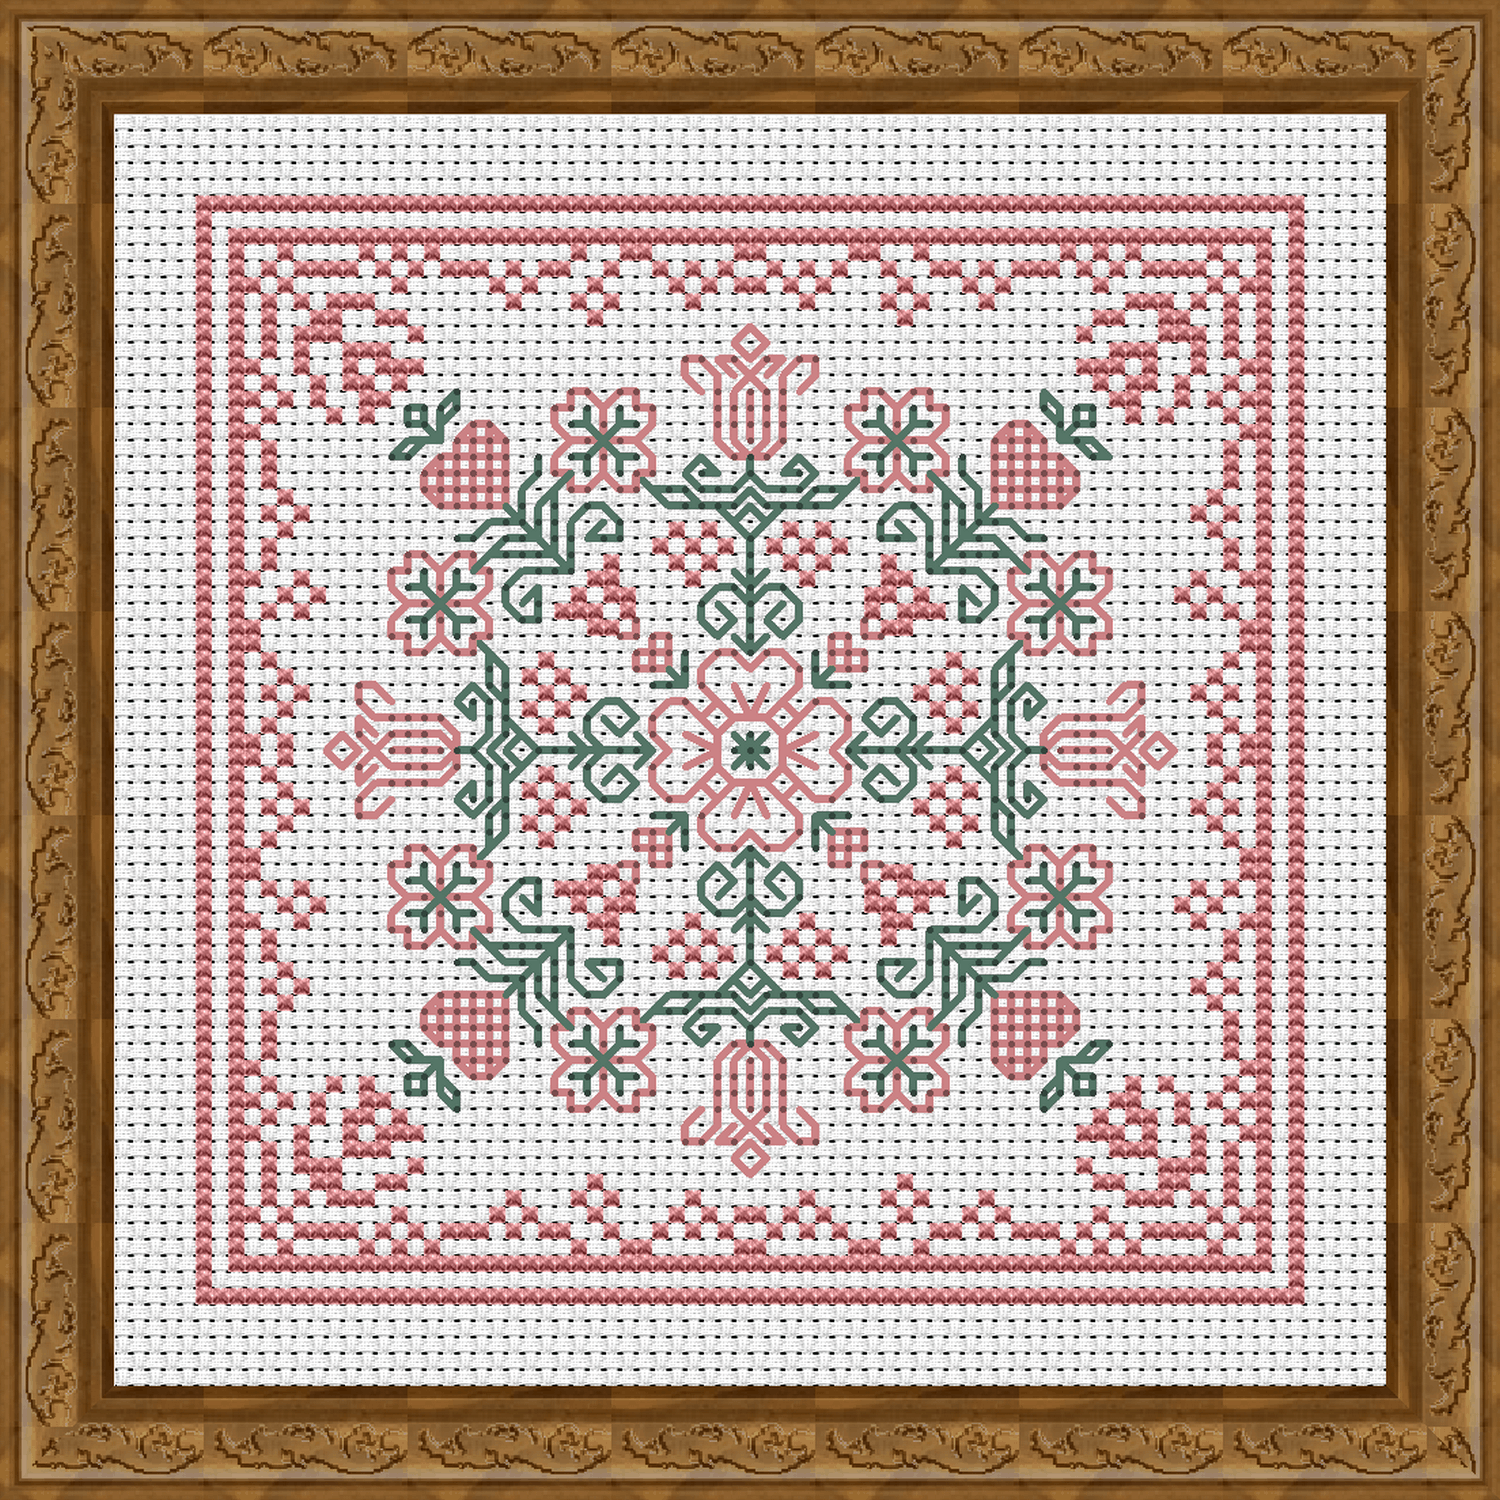 April Hearts Square with Dogwood and Tulips Cross Stitch Pattern 3503